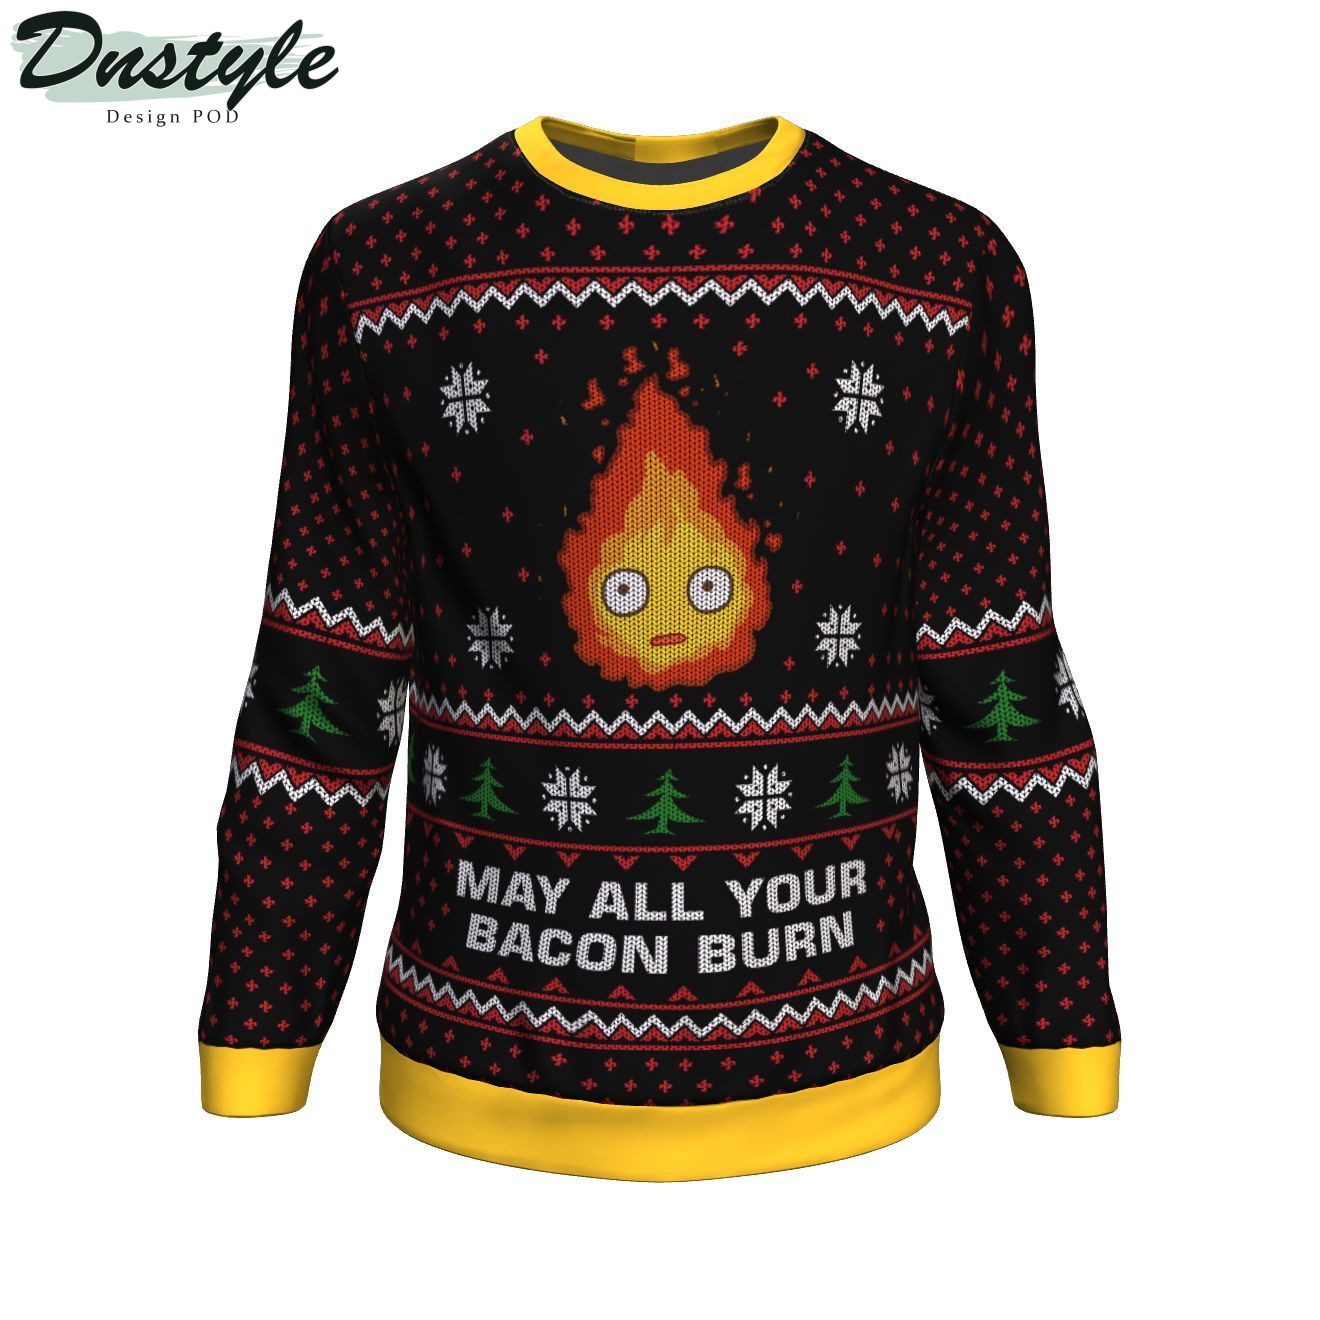 Everything Will Be Alright Sailor Moon Ugly Christmas Sweater